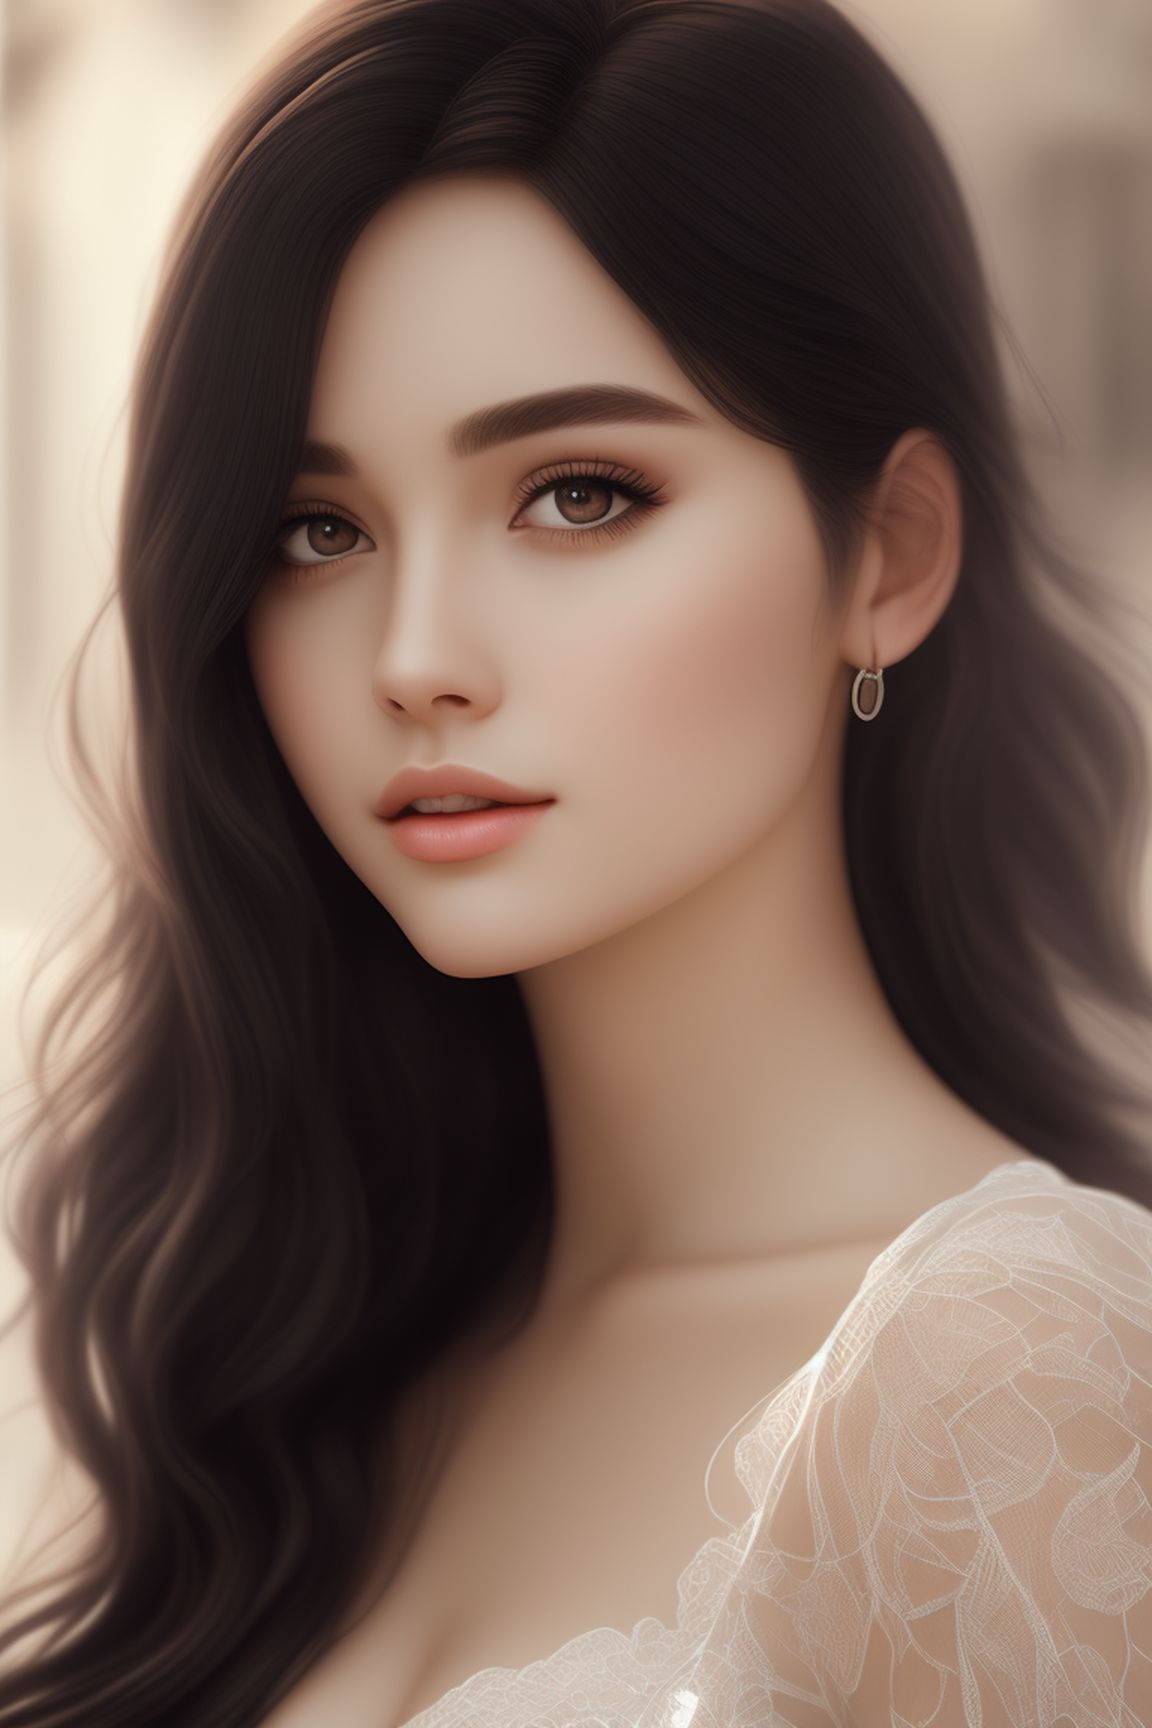 Romance: Handsome guy.18 years old. Black hair.A gentle impression. a beautiful woman.17 years old. Beautiful dress.Wavy long hair. 4k. Facing each other.--16:9, "Overcome Limits", (((Full body))), 16k UHD, 17 years old, 1920x1080, 4k face, A cozy and inviting atmosphere, Accurate eyes, Accurate face, Adorable big eyes, Aestitic, Alluring, Art by wlop, Attractive woman, Attractive outfit, Beautiful Highly Detailed Face, Beautiful eyes, Beautiful scenery , Beautifully adorable and cute, Beutiful, Black hair, Clear skin, Clothing askew, Adorable, Aesthetic, Amazing photo, Classy, Clean, Delicate and fine, Delicate, Ultra realistic